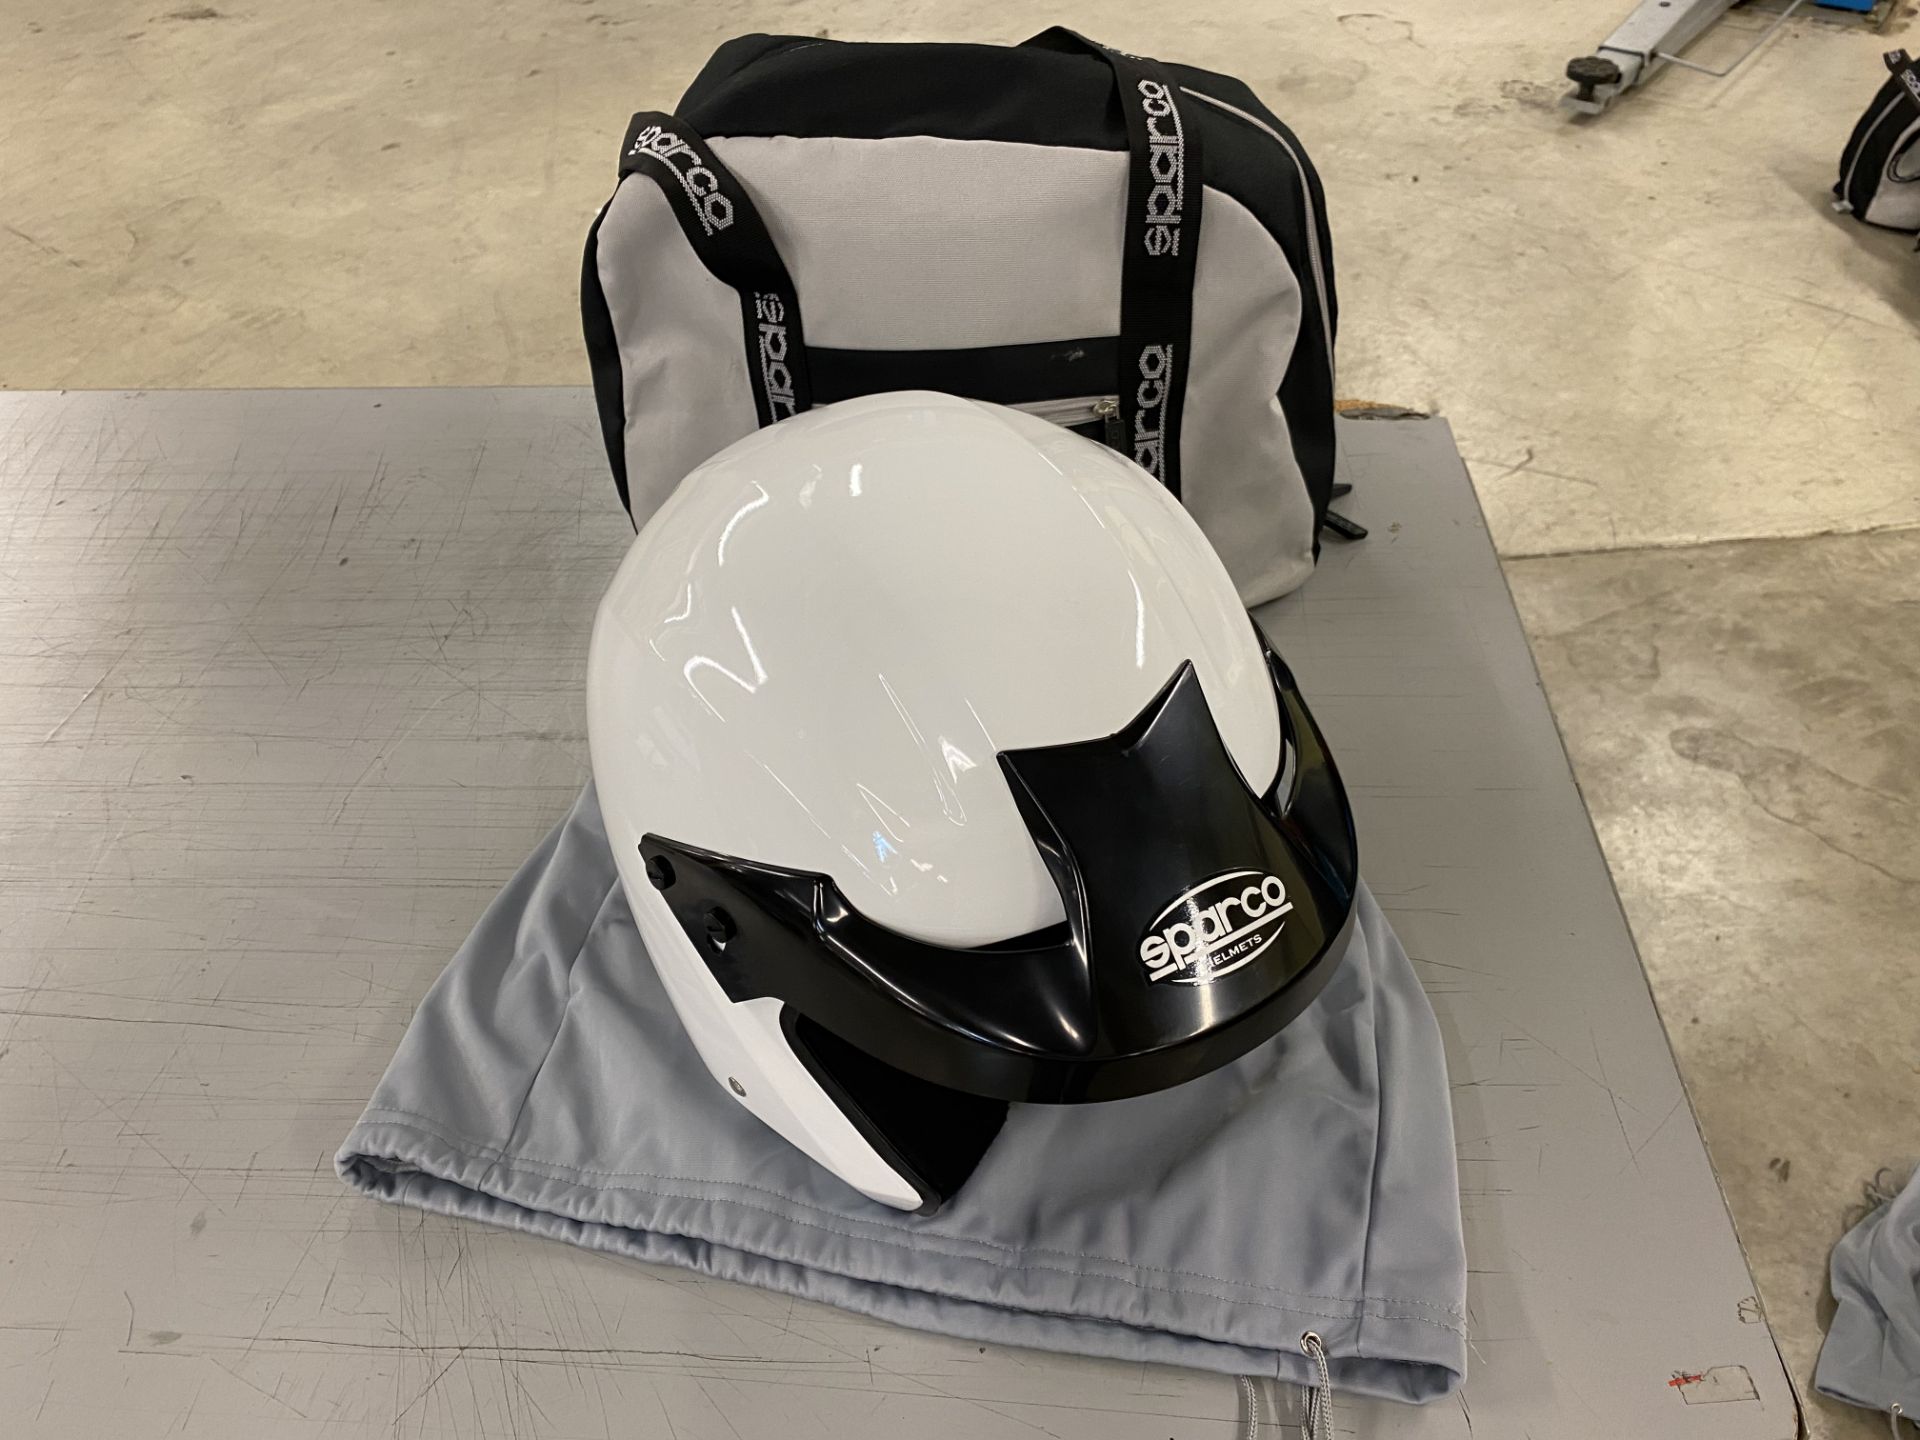 Sparco Jet Pro 2013 open face racing helmet with cover and storage bag size M - 58 (Used)